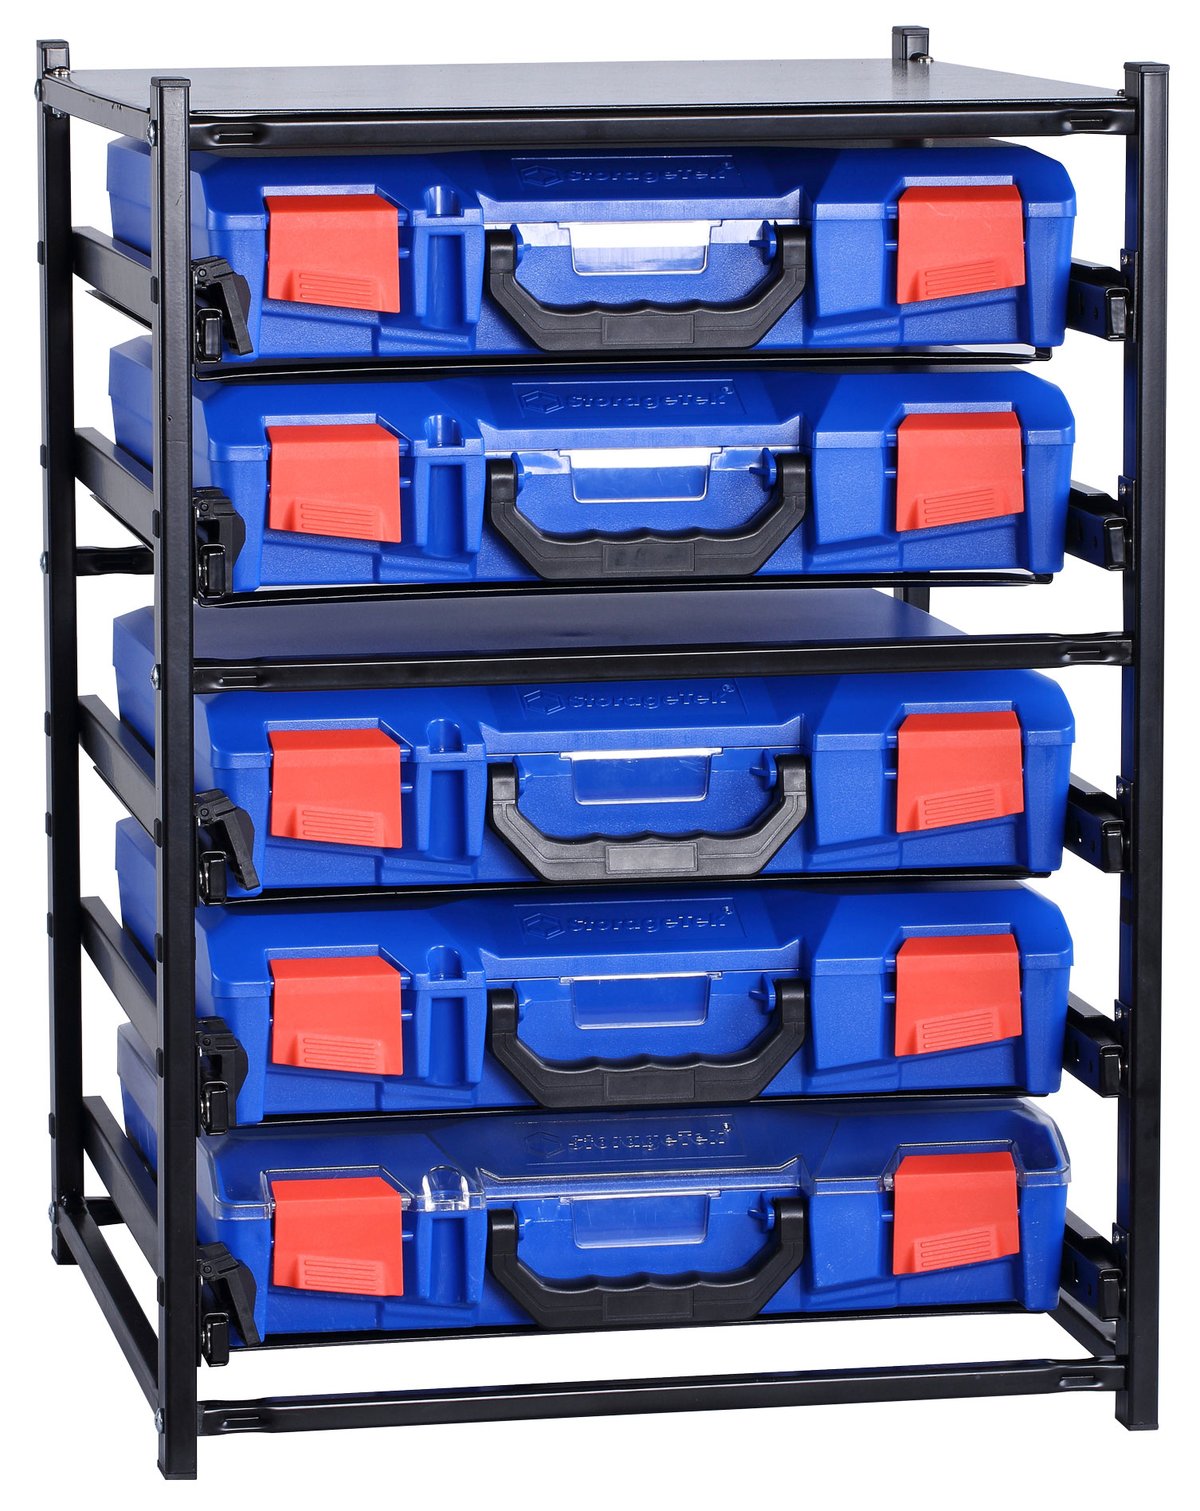 storagetek-frame-complete-with-5-small-abs-cases-with-pc-lid-fully-assembled-blue-case-sfs5sa-bl